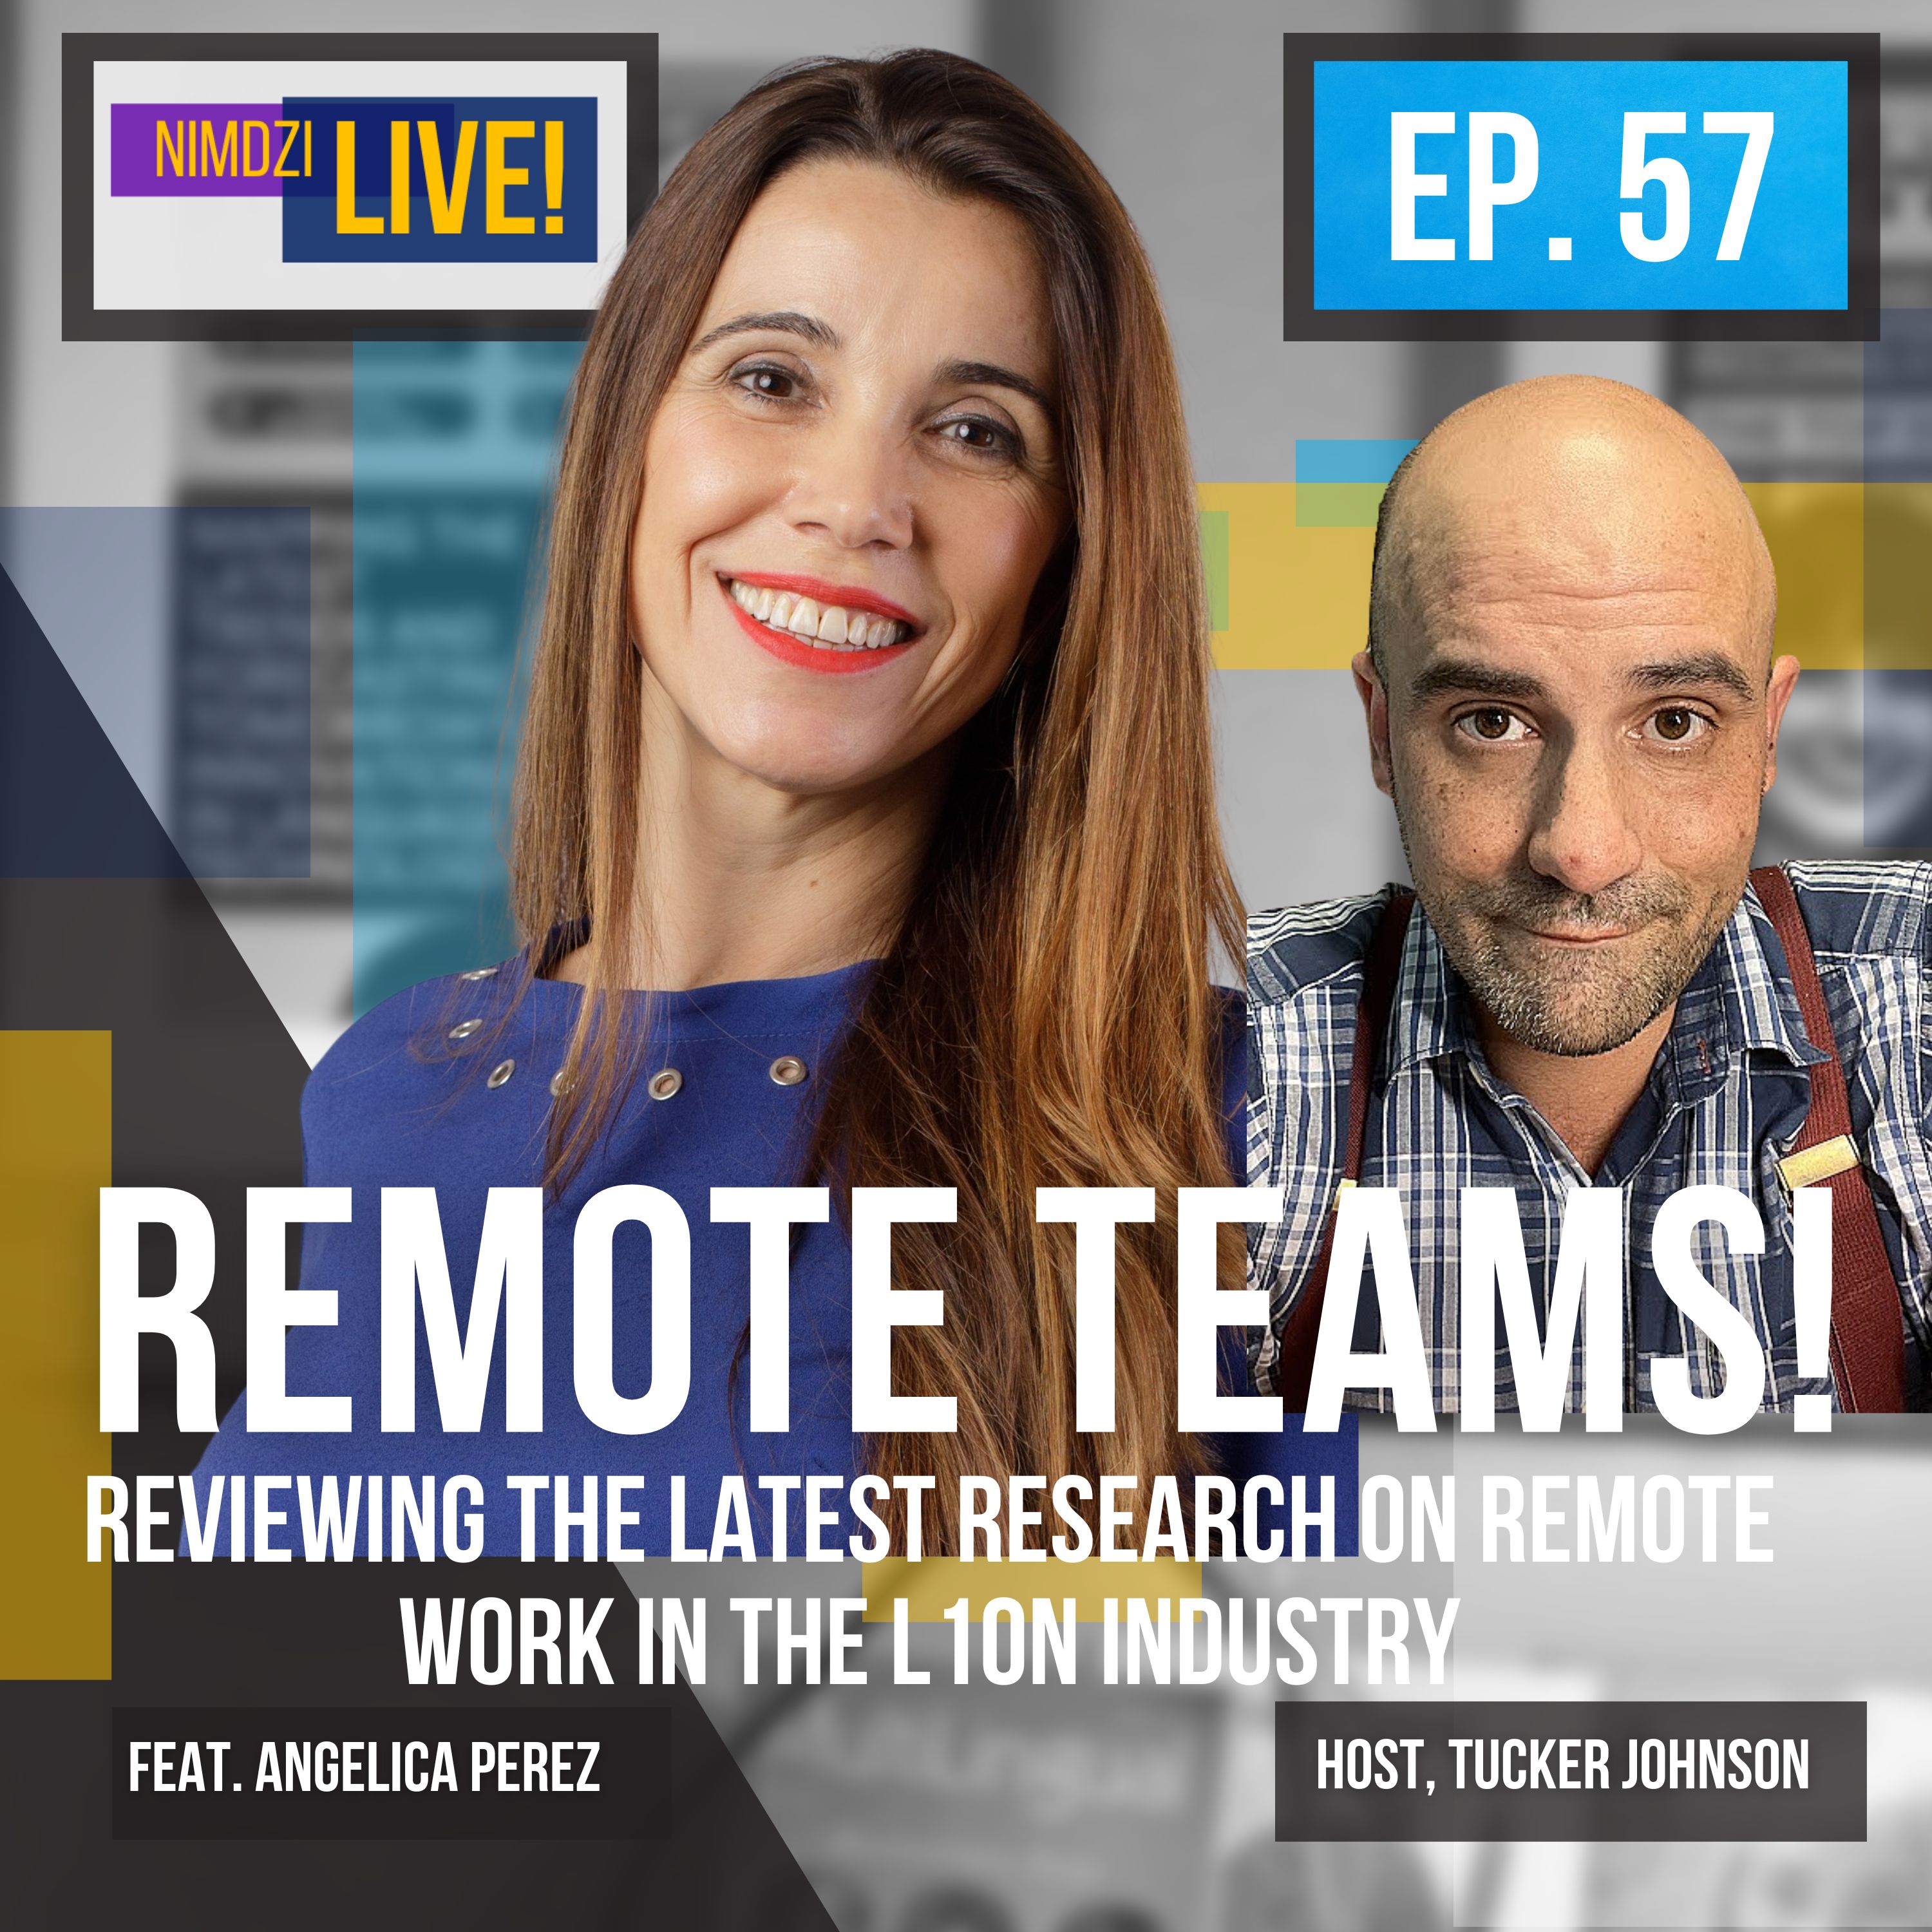 Research on remote teams and global dispersion in l10n industry  (feat. Angelica Perez)